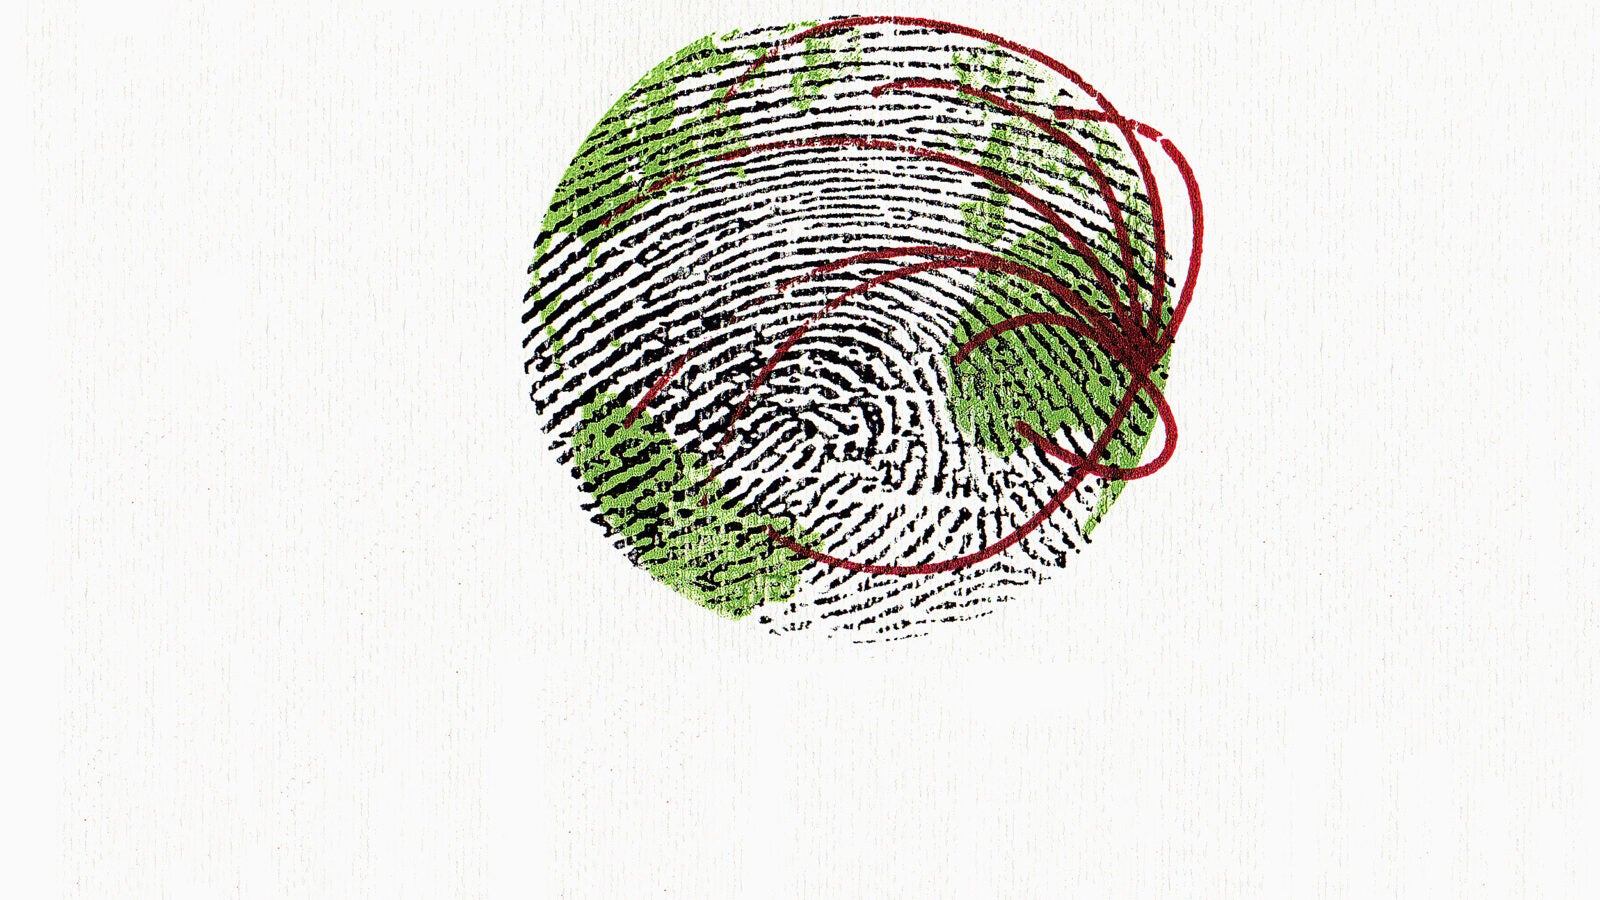 Illustration of globe overlaid with thumbprint and migration lines.